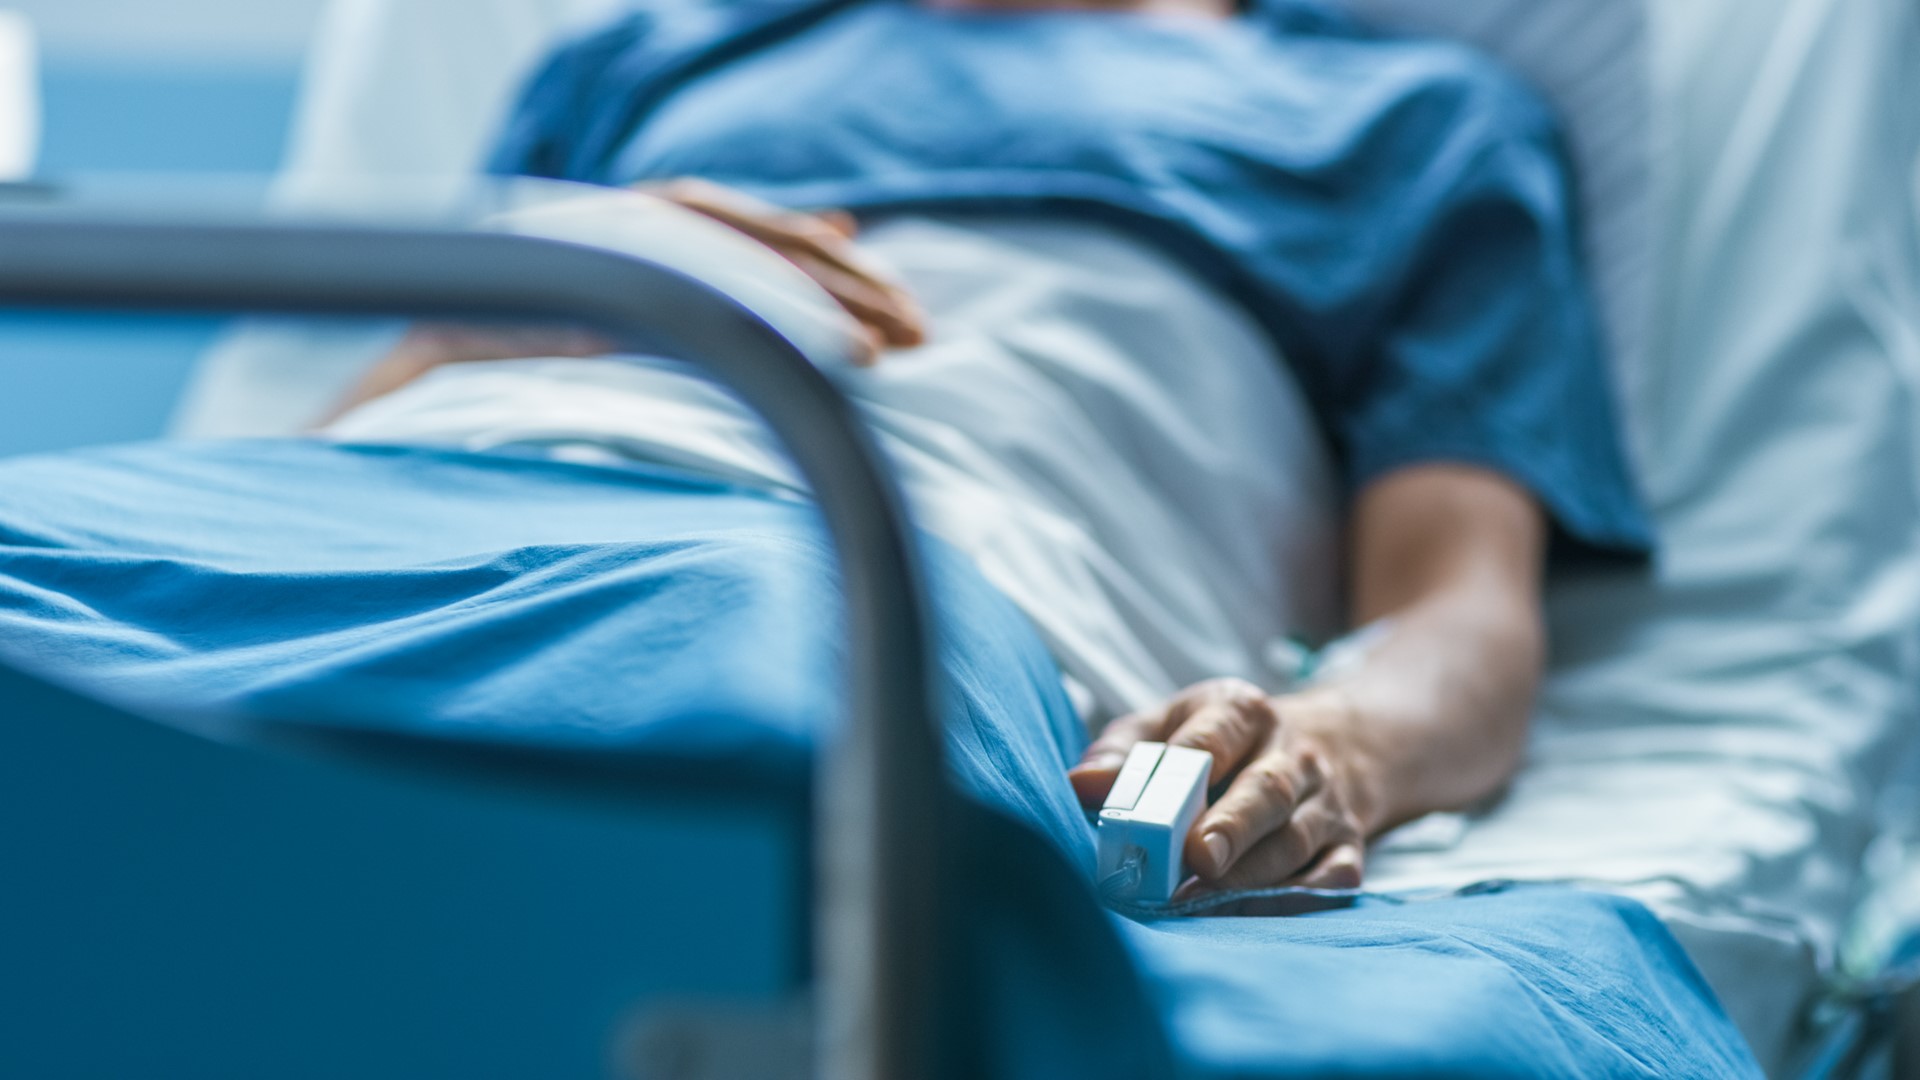 A tweet from Gov. Kemp's communications director claims hospitalizations and ICUs are seeing declines in the number of COVID patients. But, is that true?